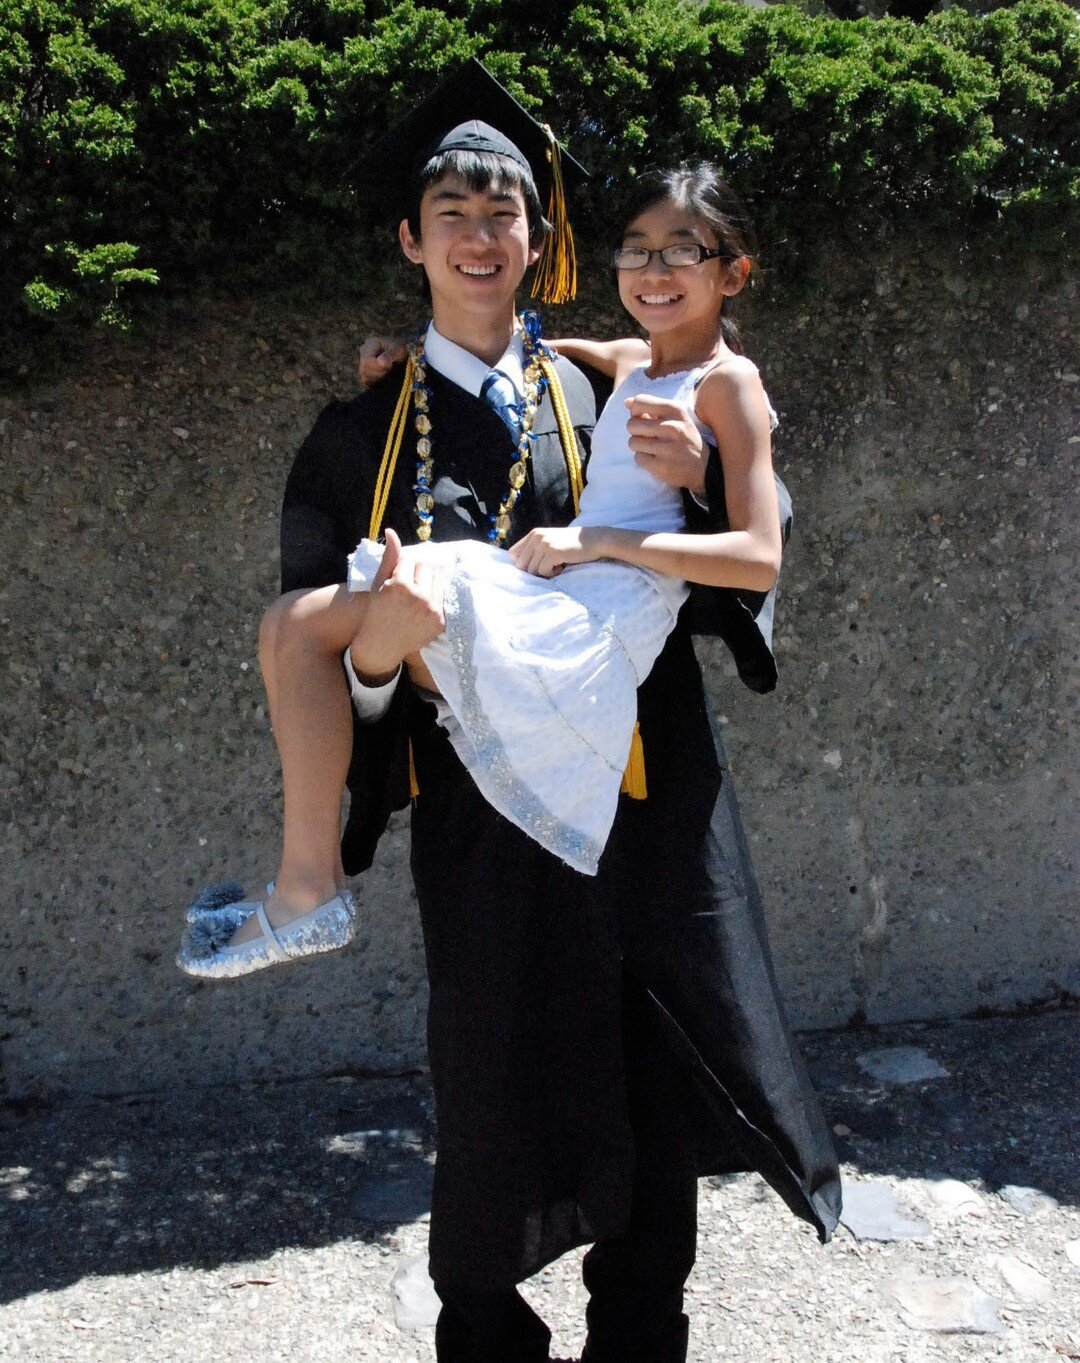 Happy graduation @nicoleefongg!

[1] 2013, my graduation from Cal.
[2] 2023, sister's graduation from Cal. 

Ten years ago, she was small and I loved her. Ten years later, it is still the same :).